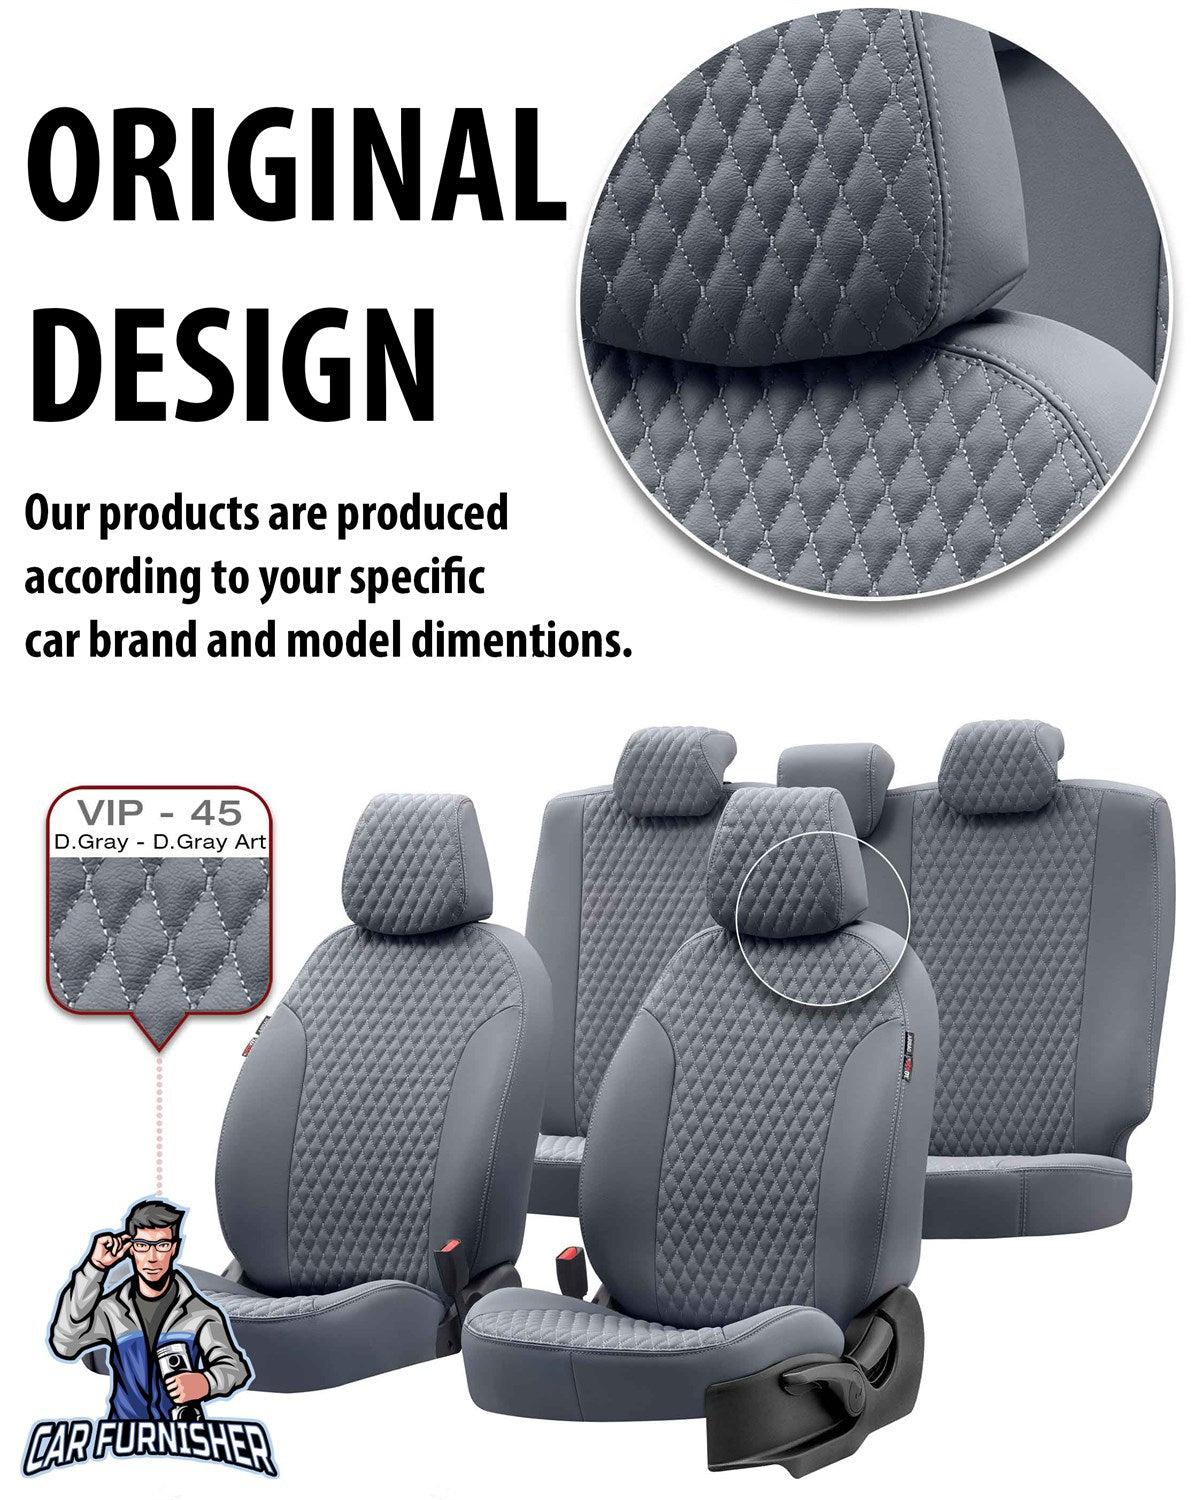 Isuzu N-Wide Seat Covers Amsterdam Leather Design Smoked Black Leather